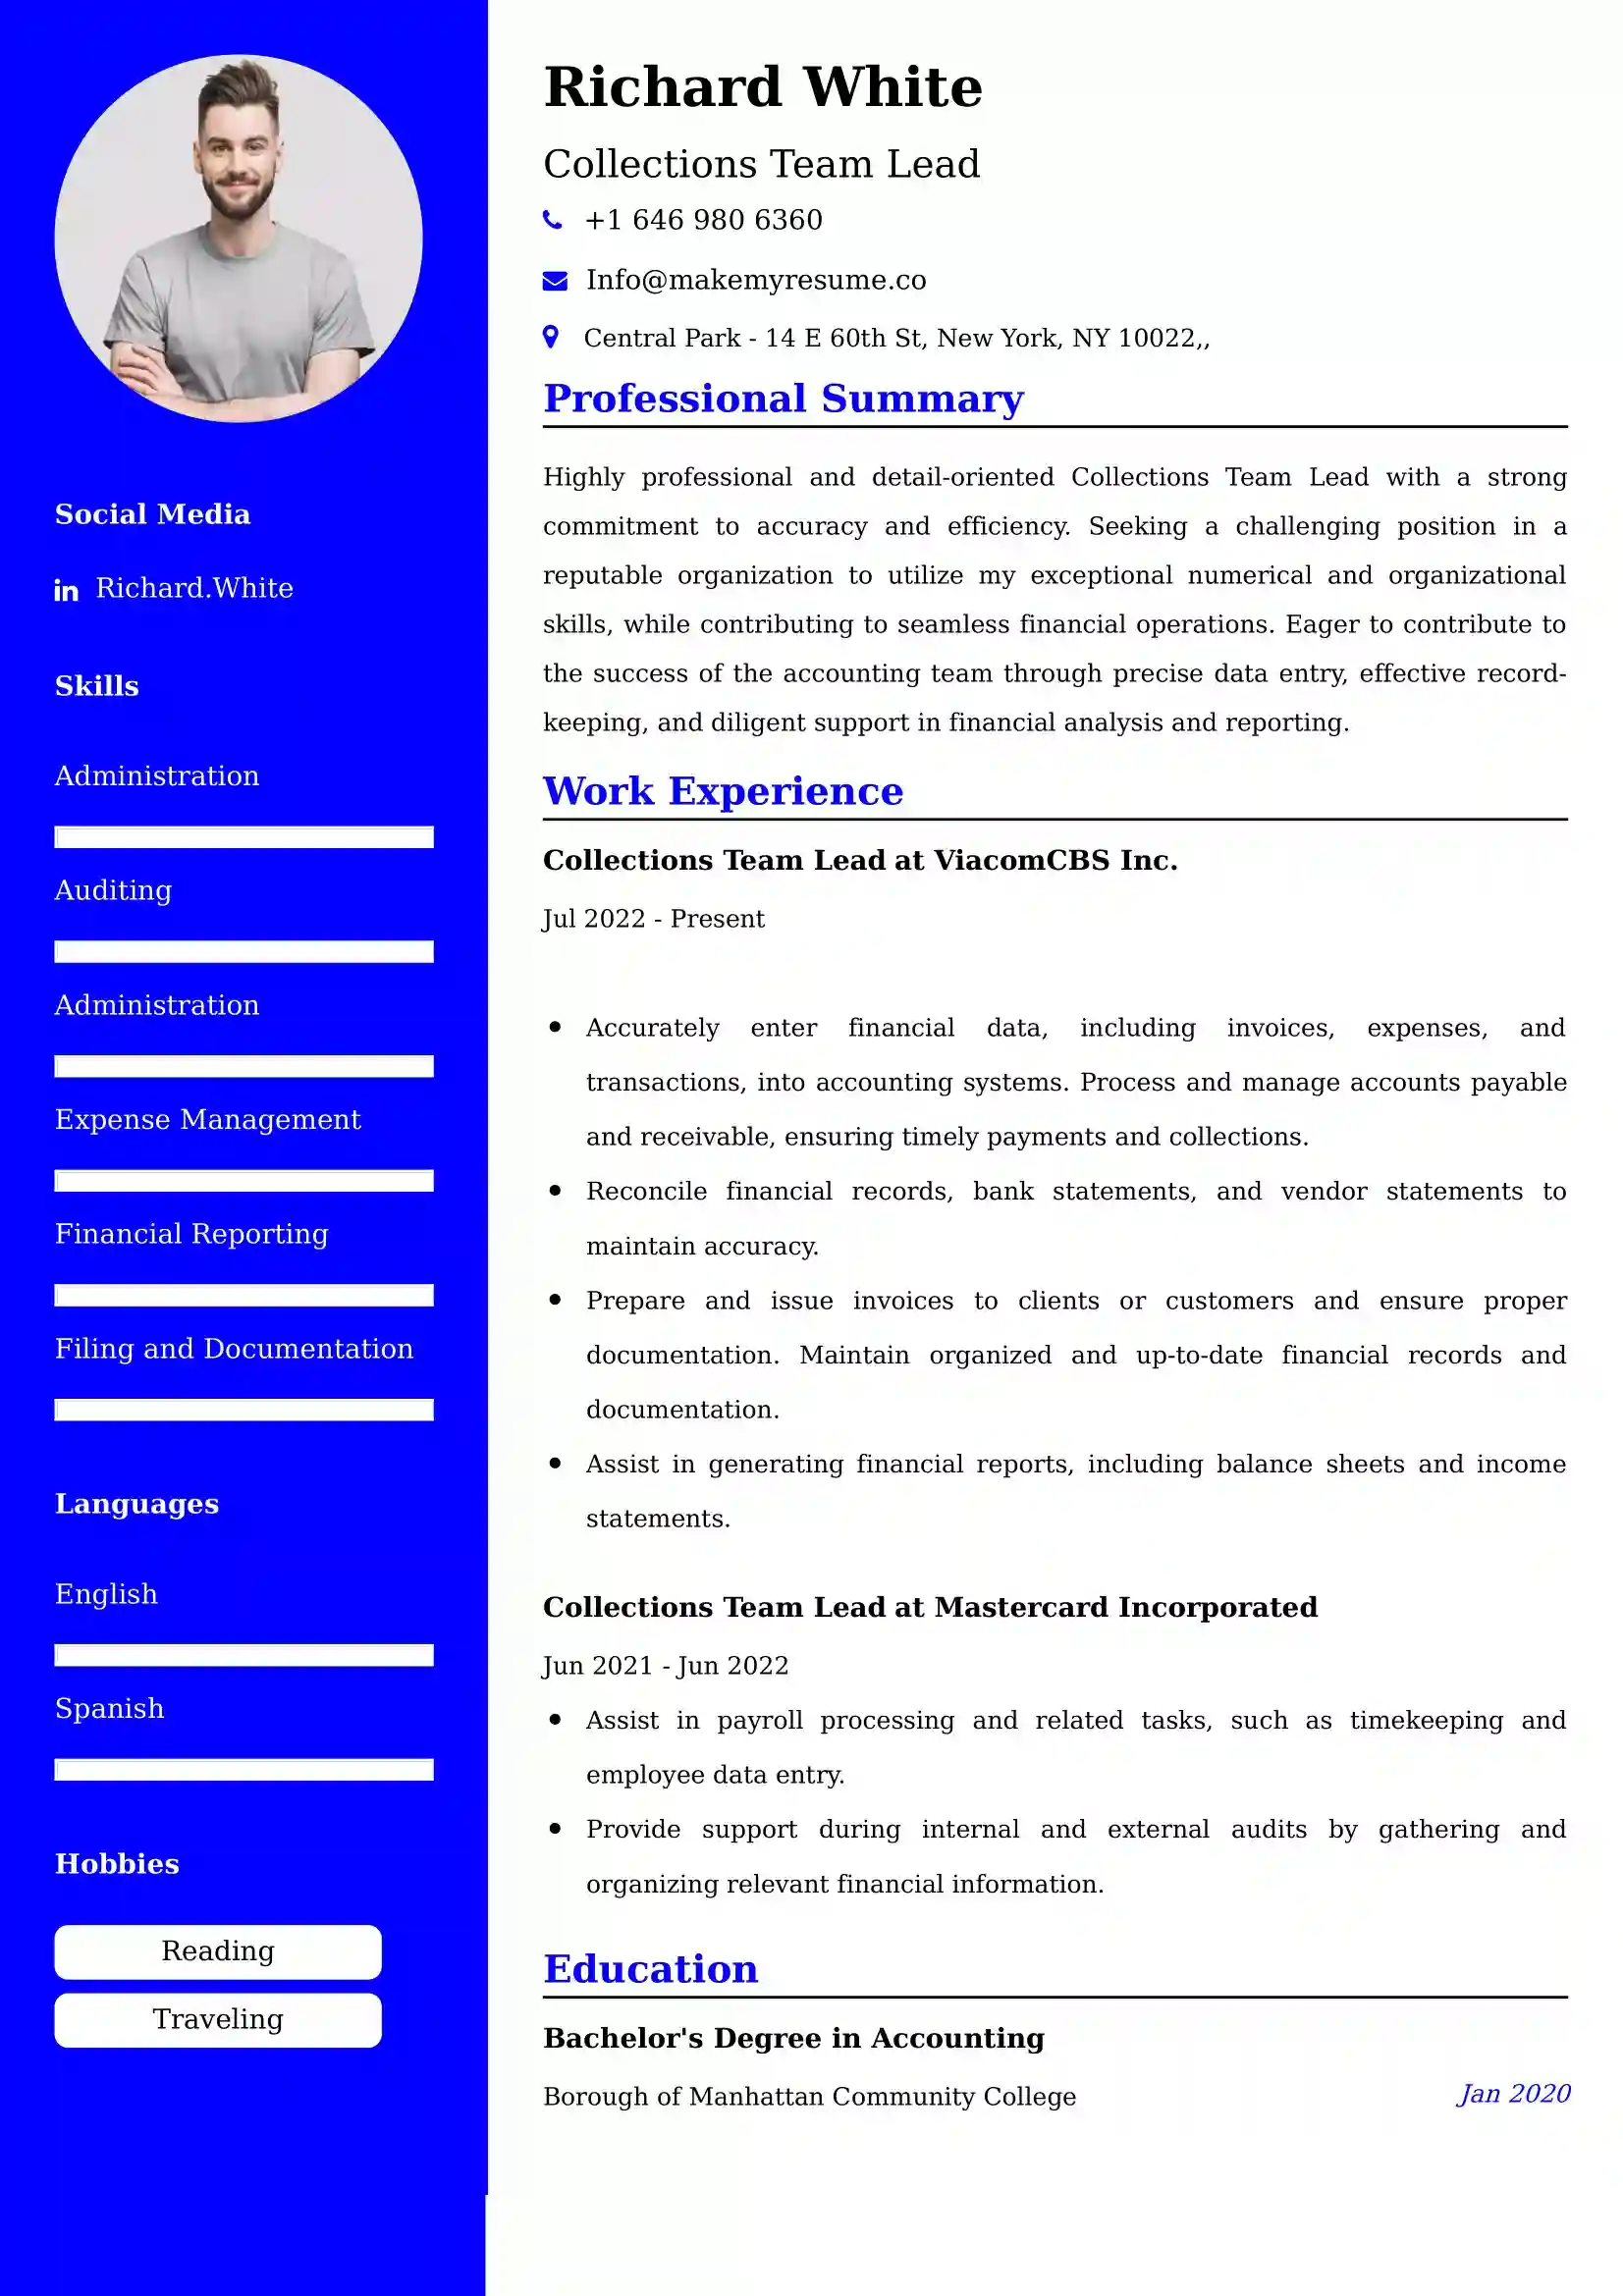 Collections Team Lead Resume Examples - UK Format, Latest Template.